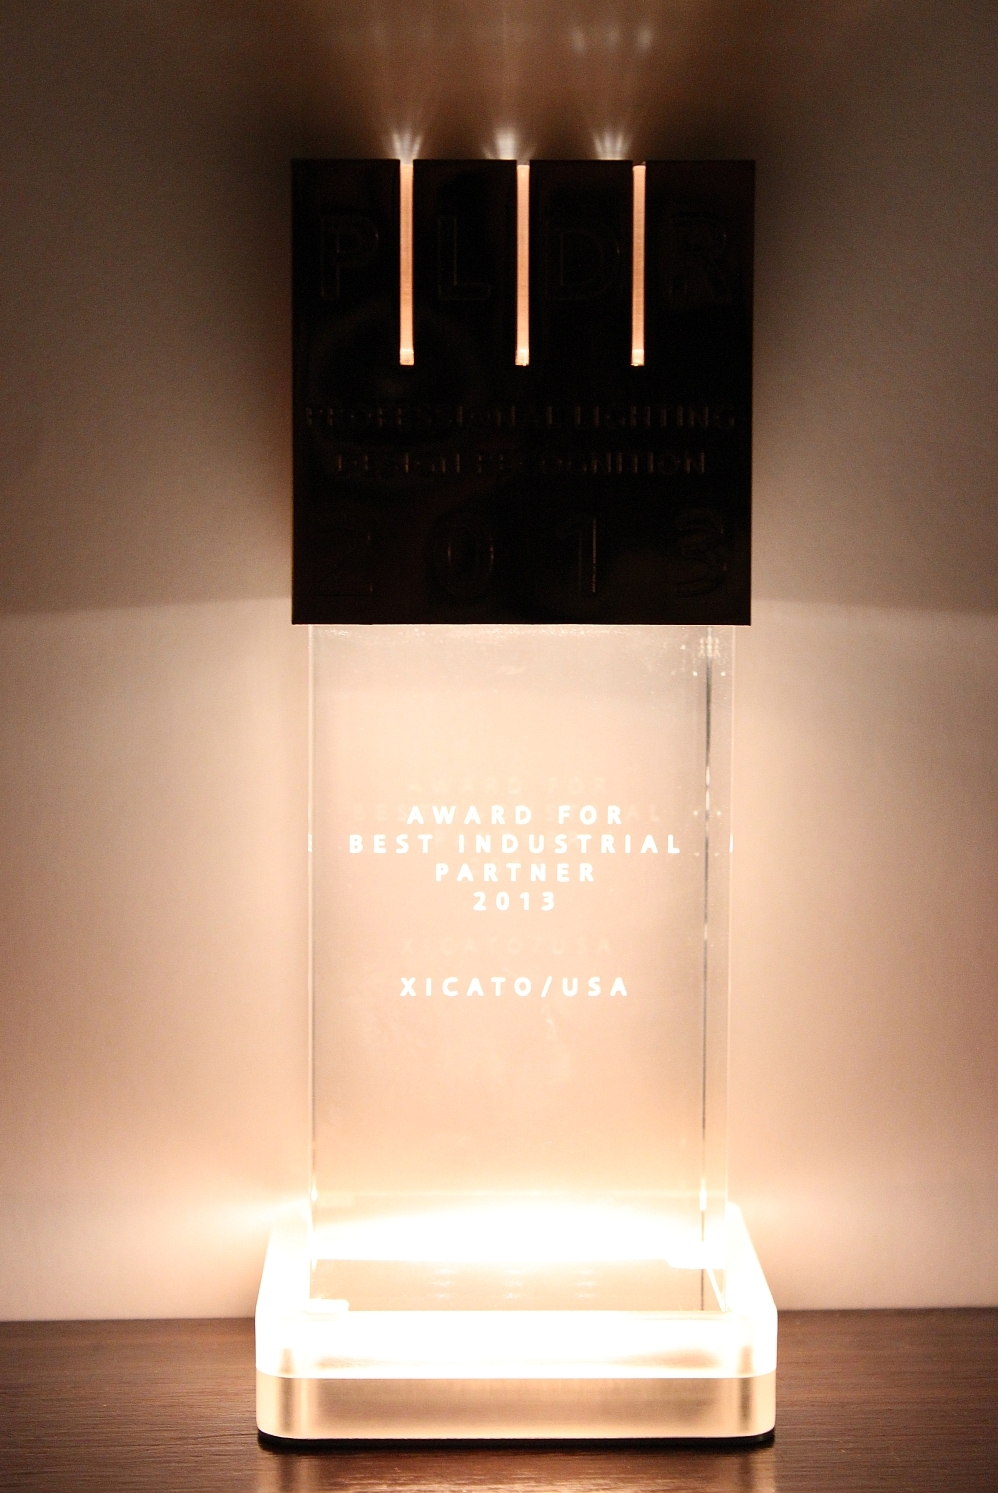 Best Industrial Partner Award given to Xicato at Professional Lighting Design Conference